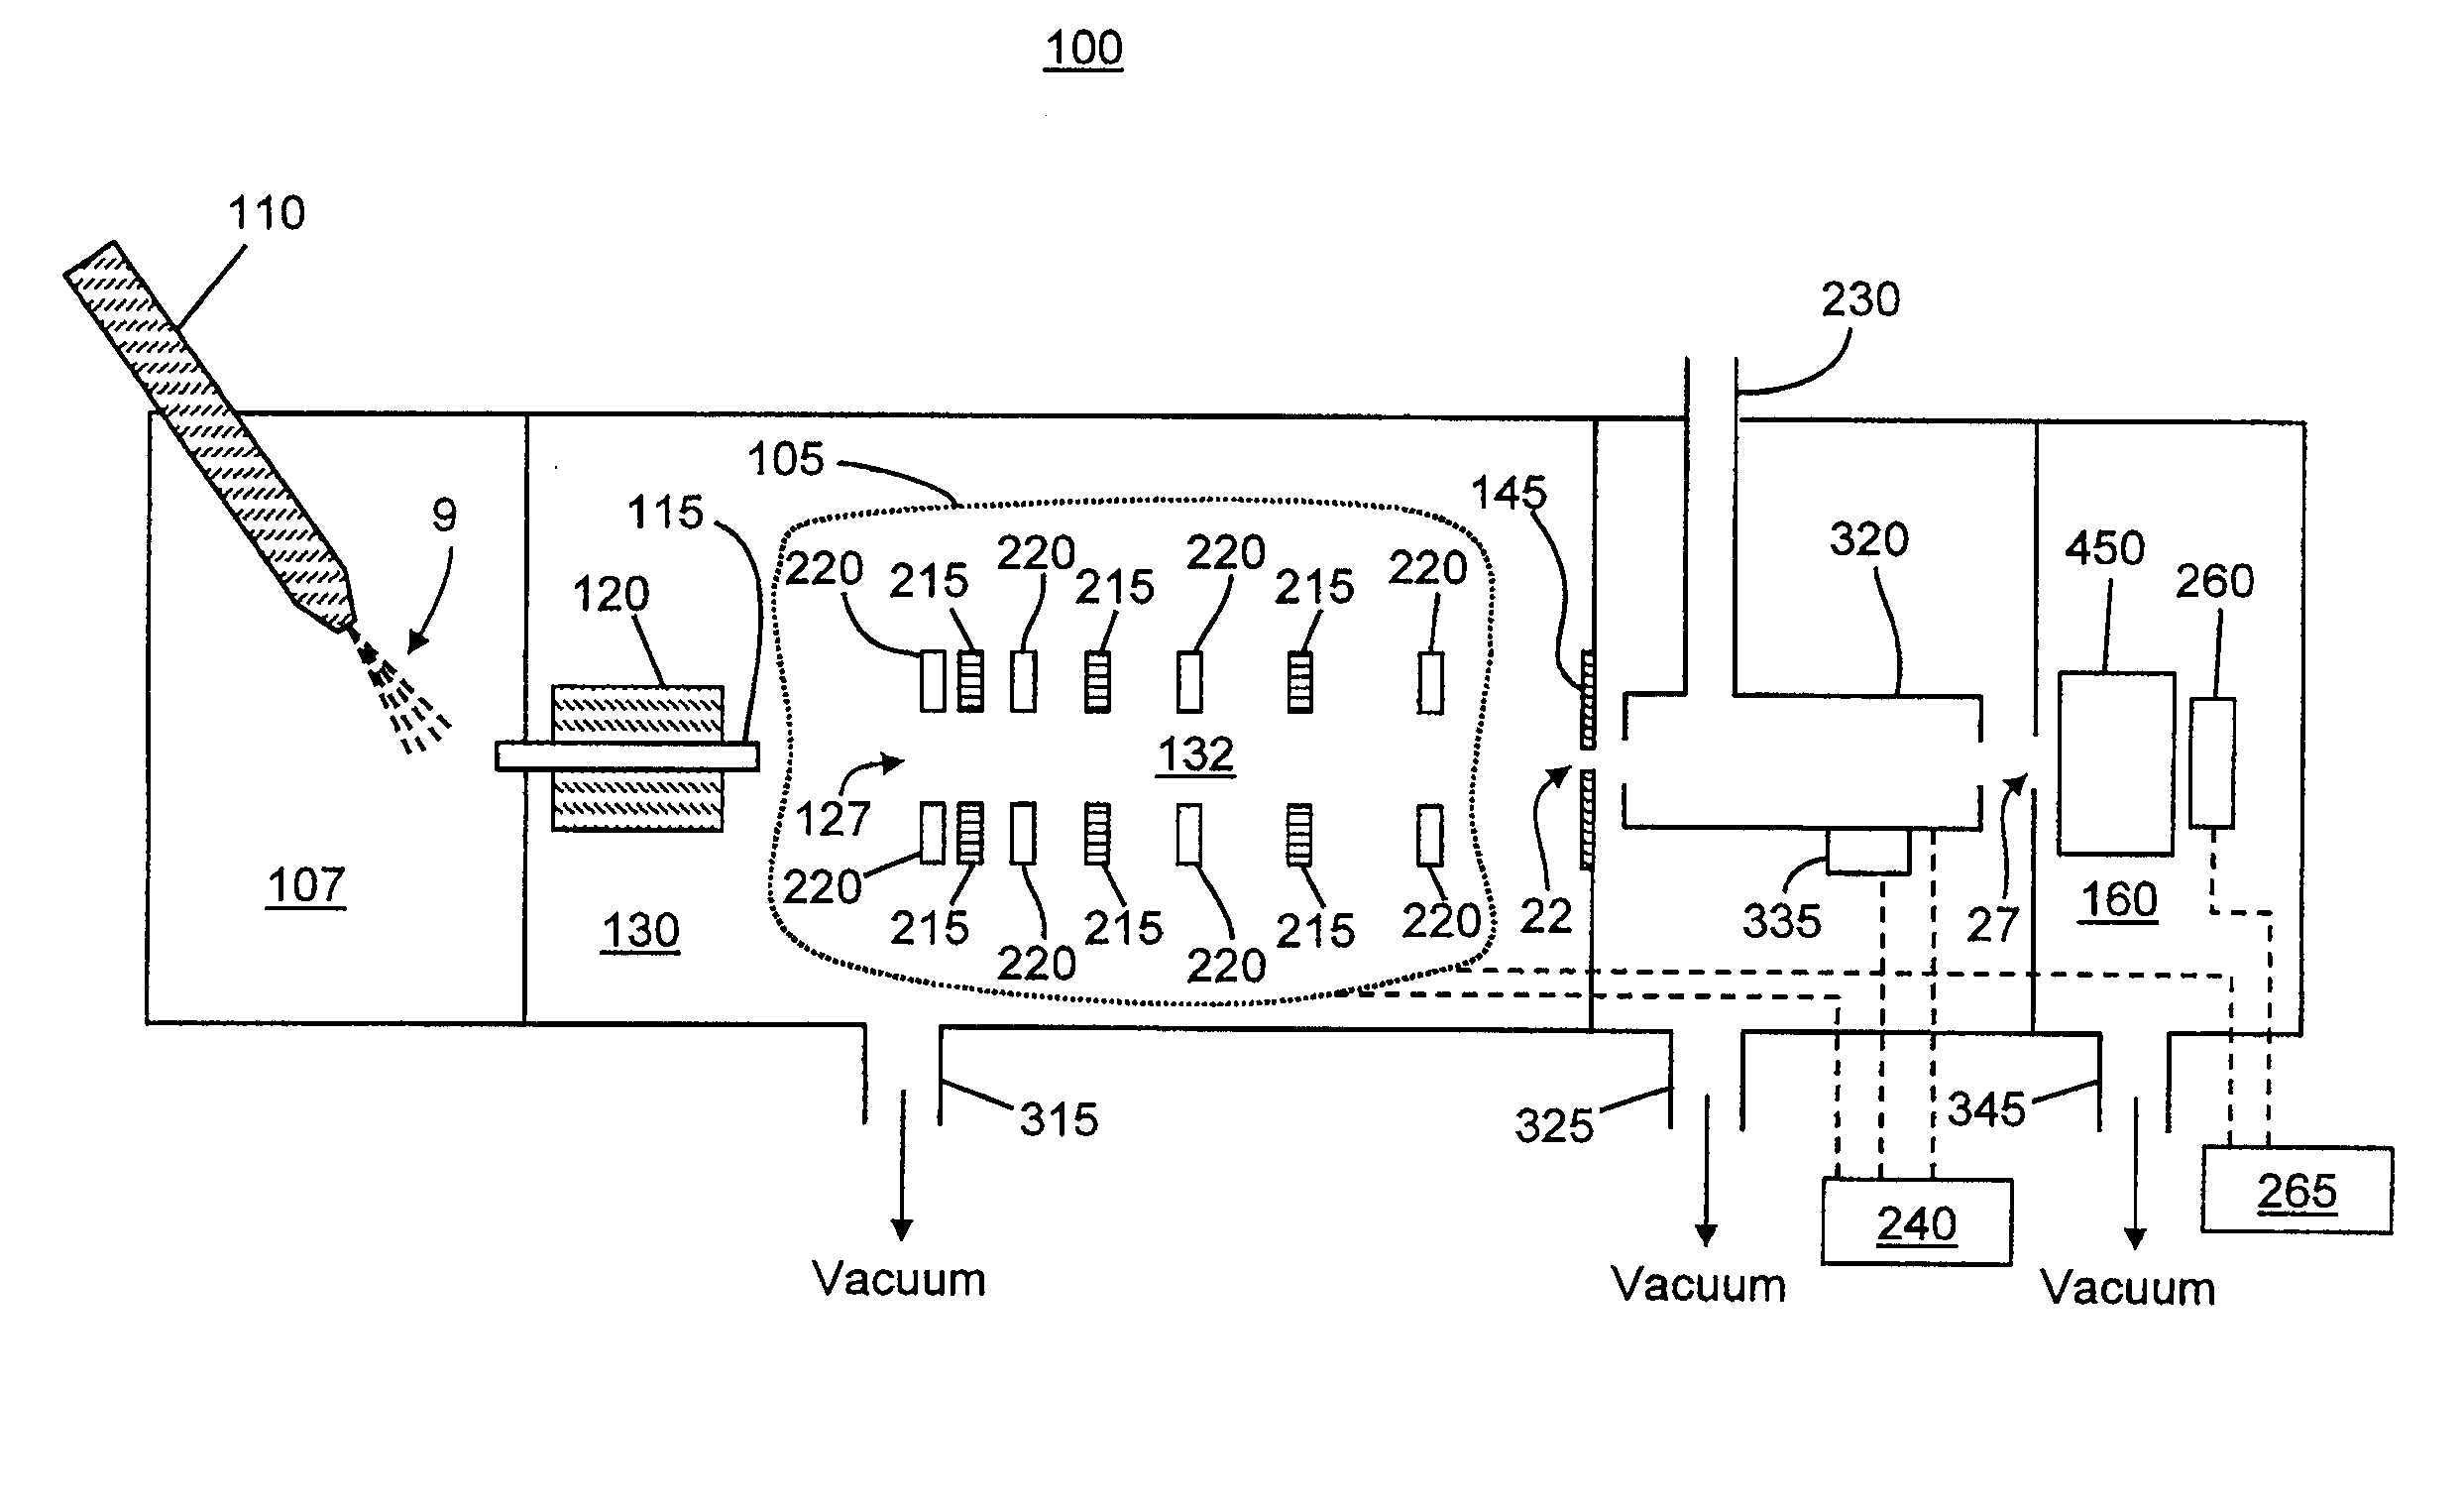 Ion Population Control in a Mass Spectrometer Having Mass-Selective Transfer Optics